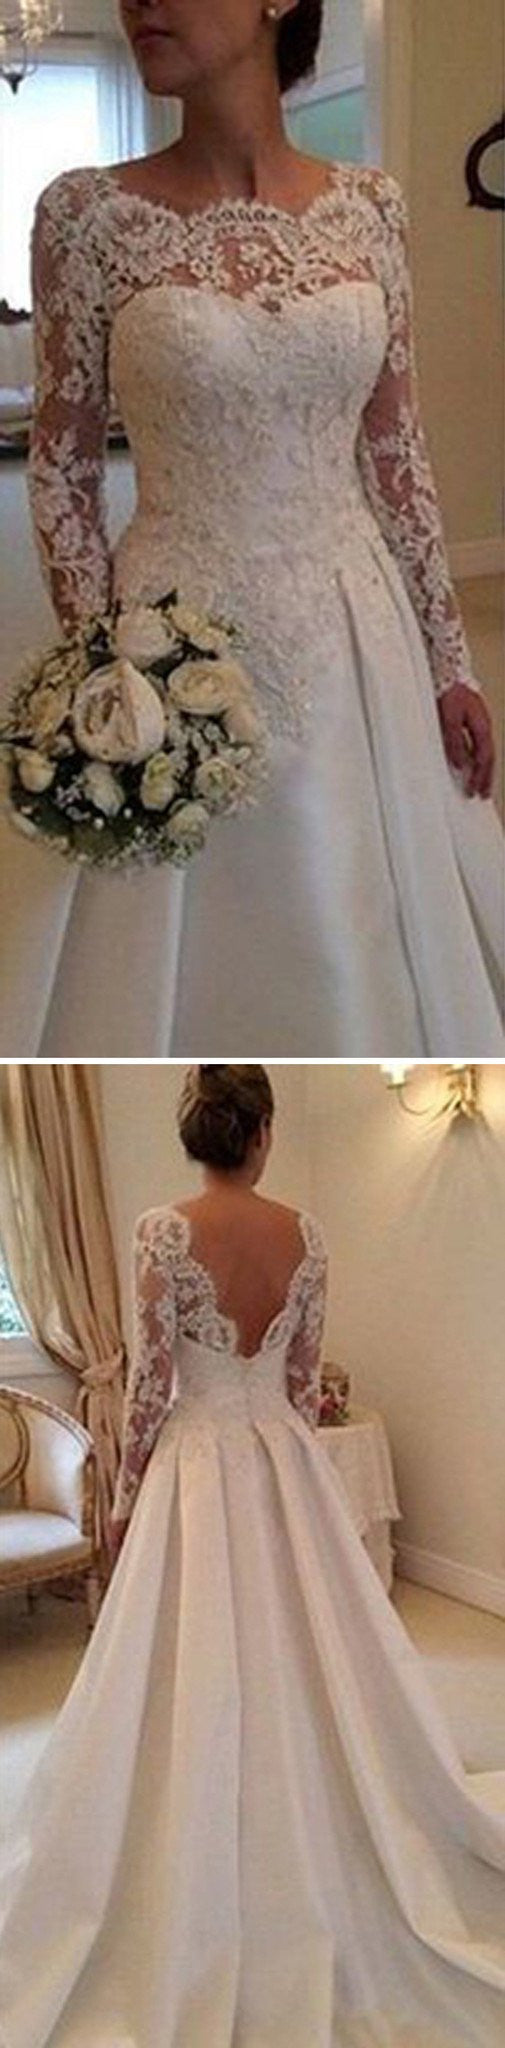 Long Sleeve Wedding Dress Lace Top Wedding Dress Low Back Wedding Dress Unique Wedding Dress WS021-Dolly Gown